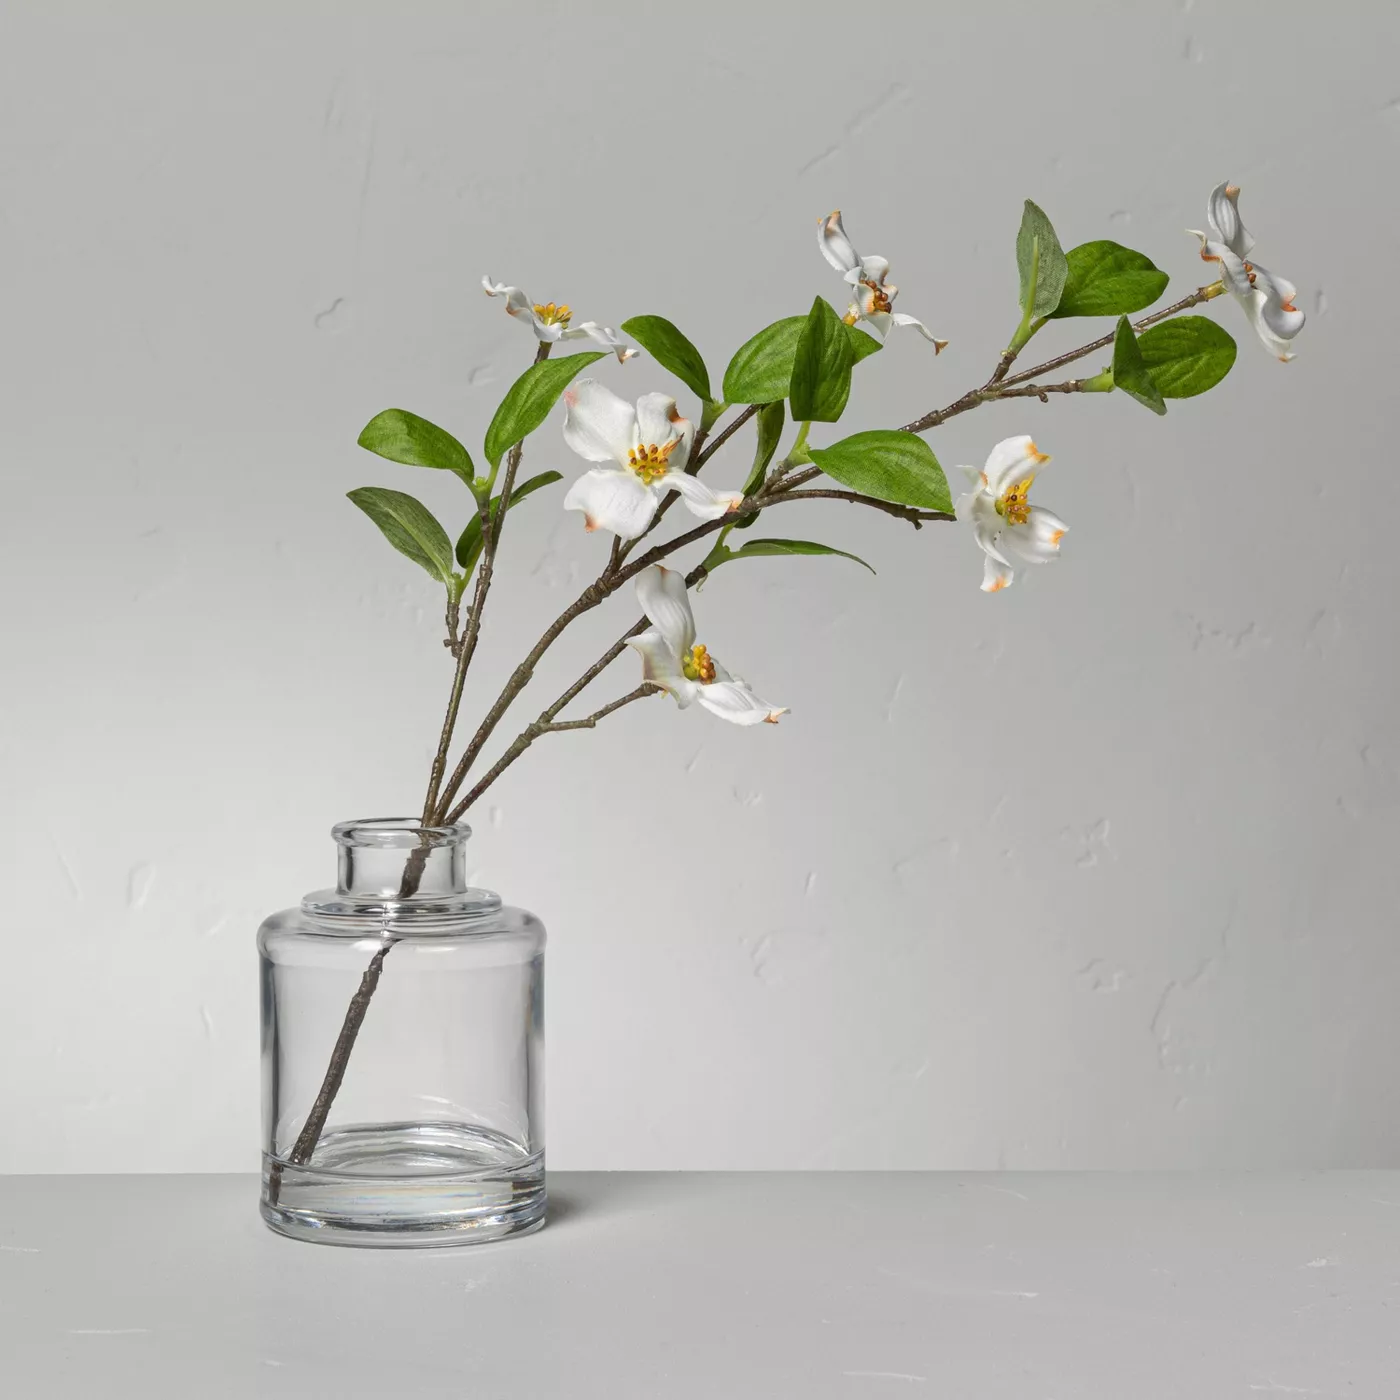 Faux White Dogwood Flower Arrangement - Hearth & Hand™ with Magnolia - image 1 of 4